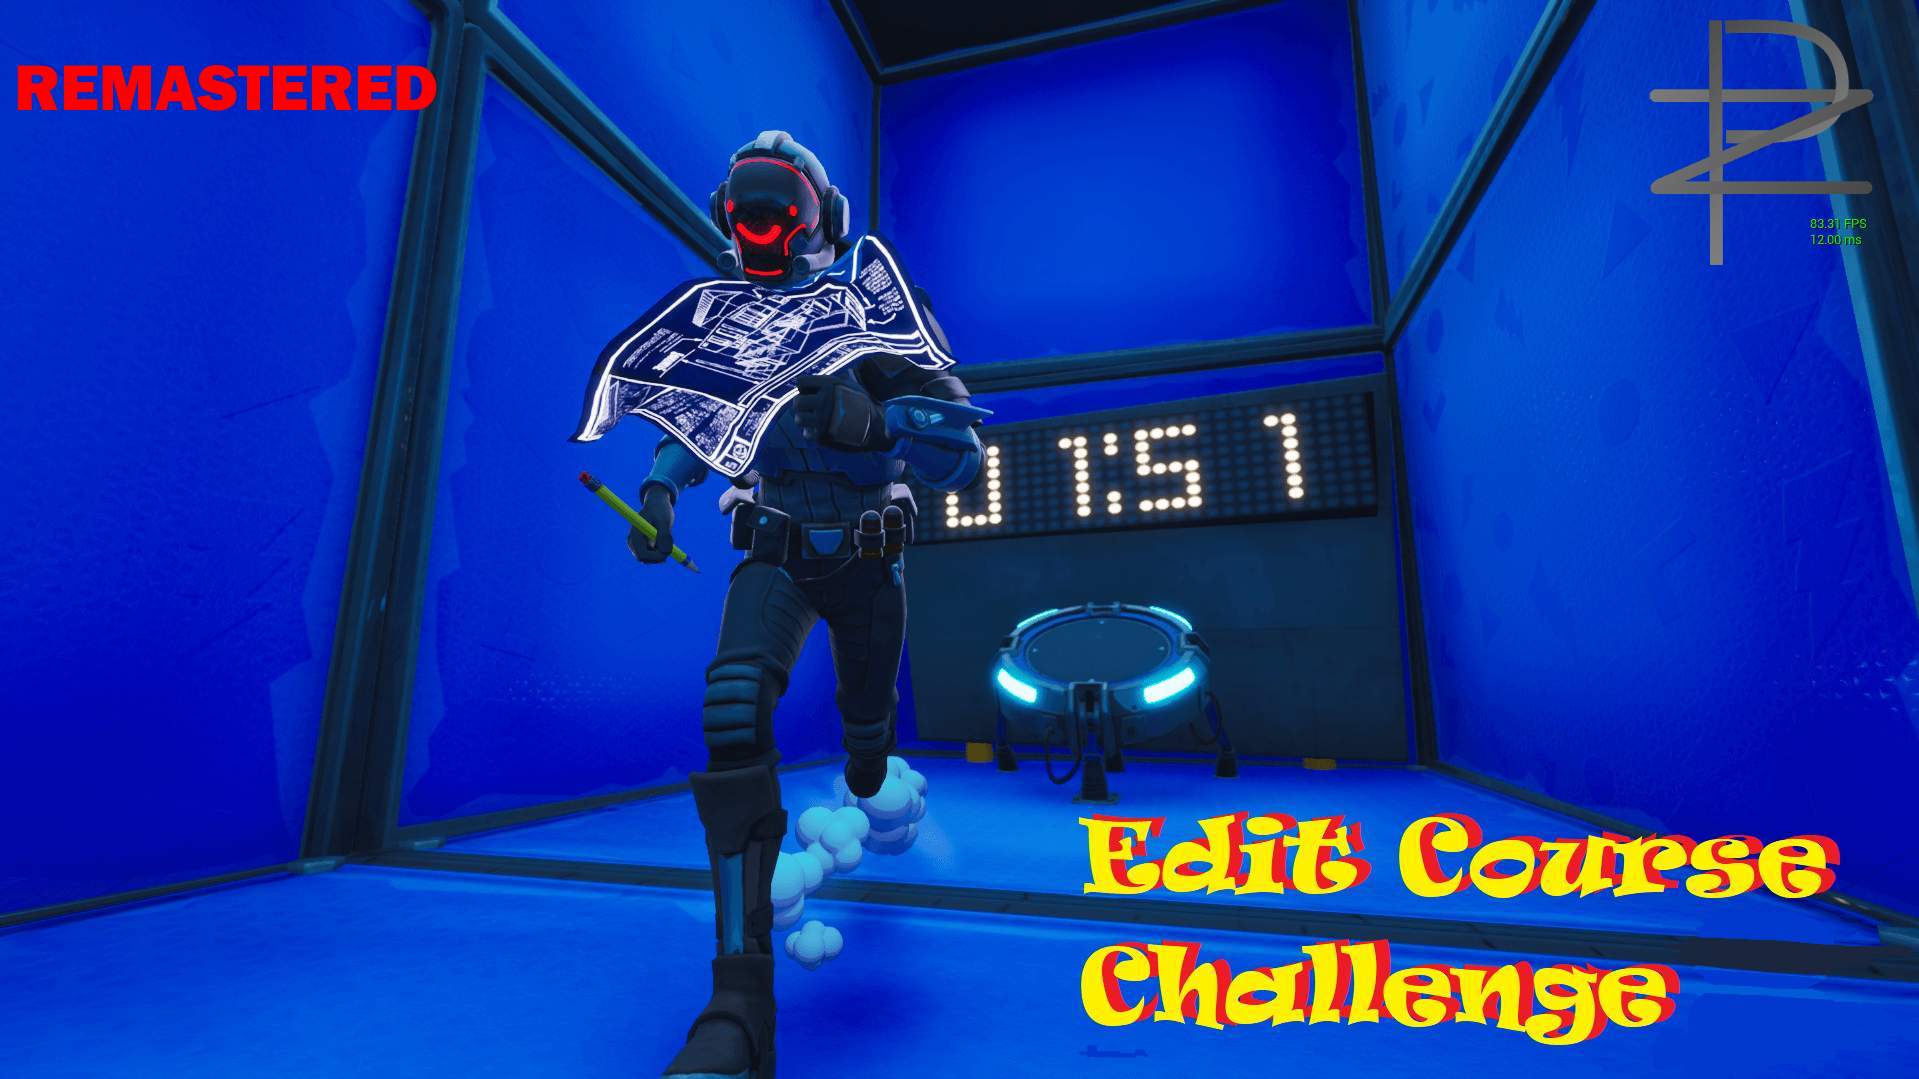 PAN'S EDIT COURSE CHALLENGE REMASTERED